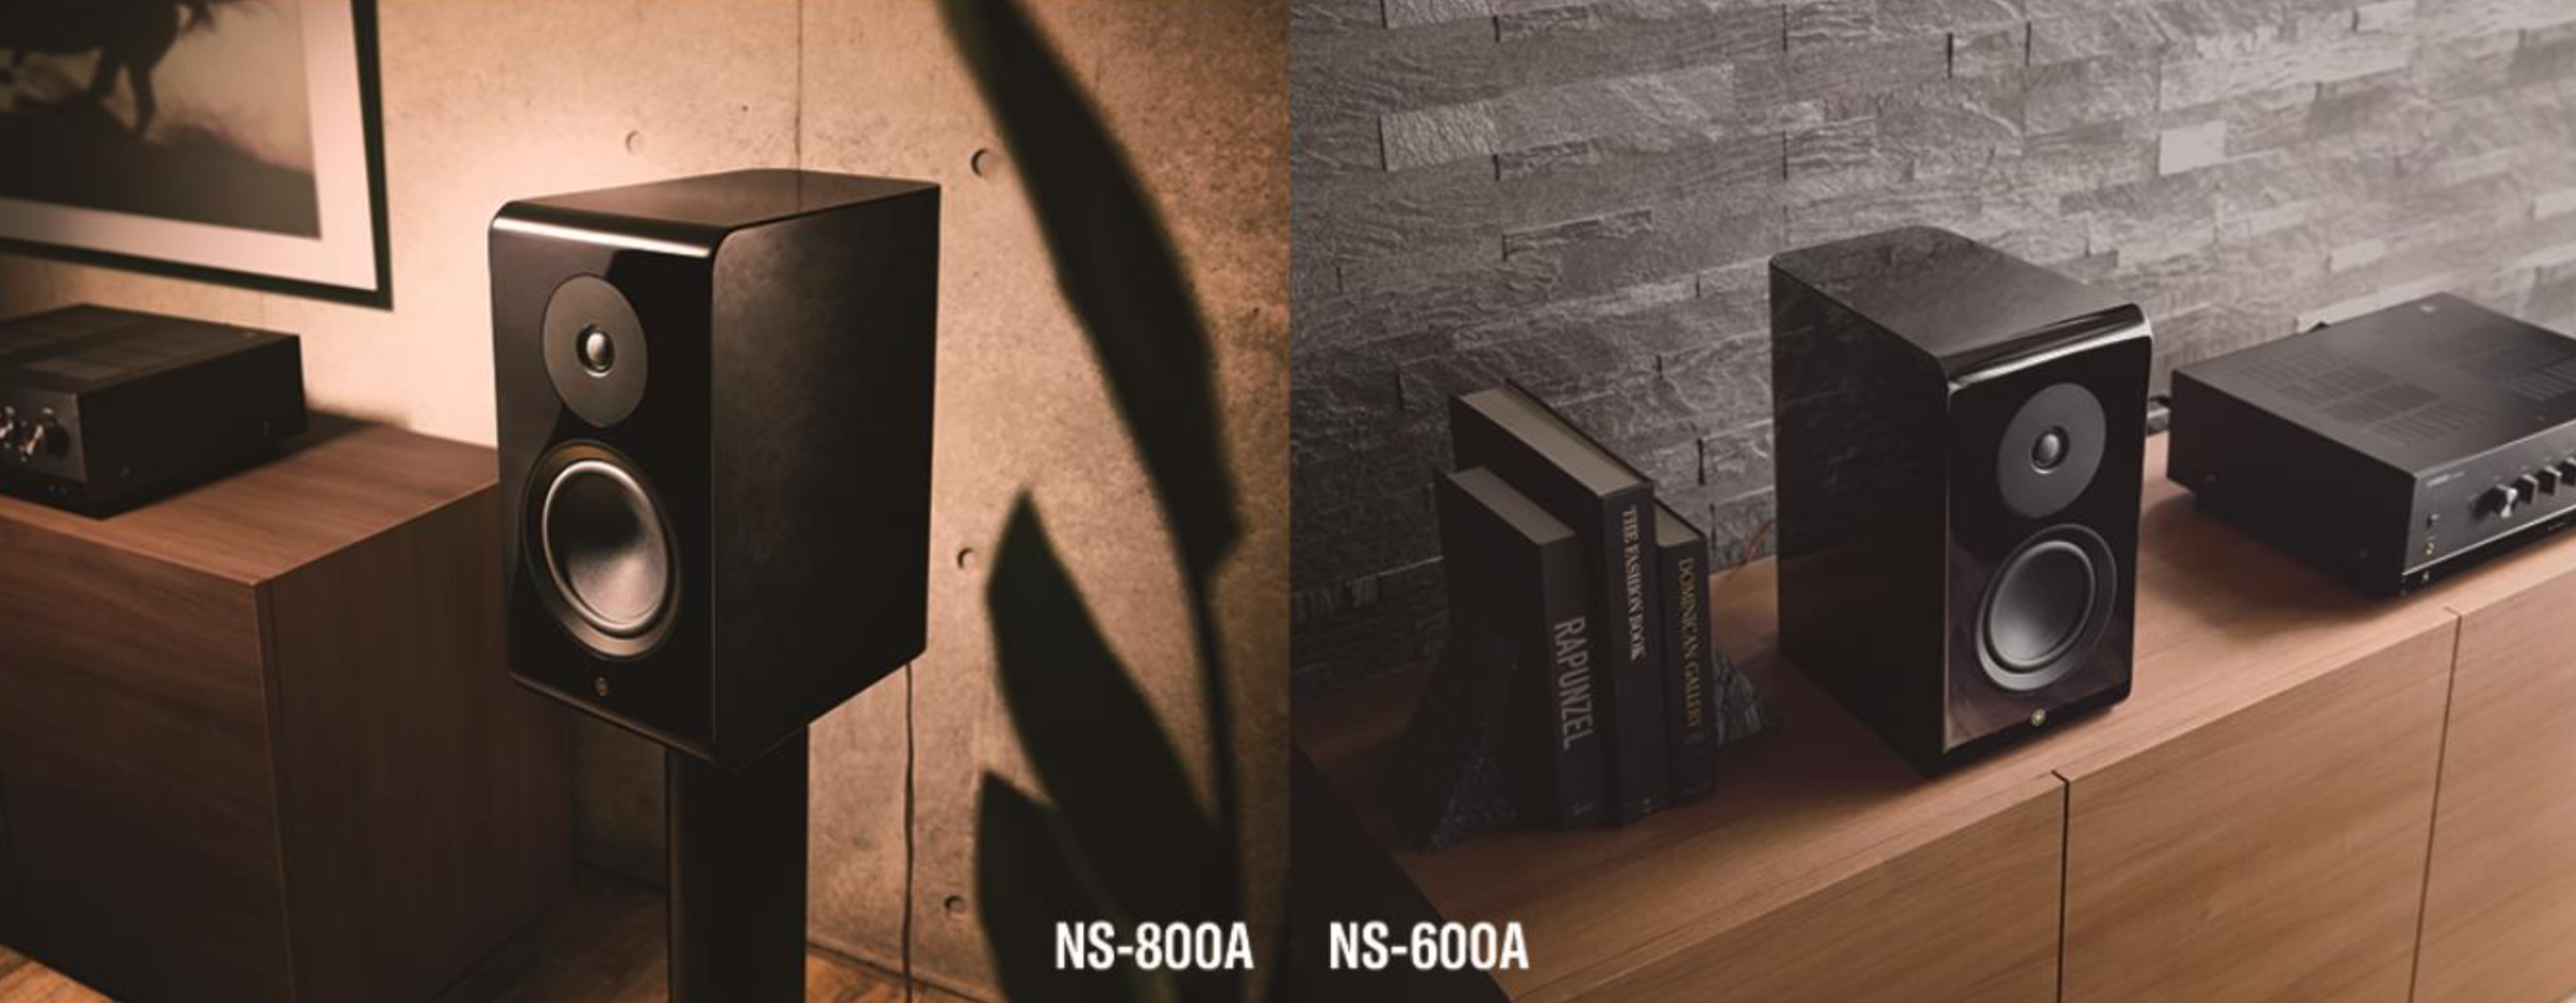 yamaha speakers New Receivers, Bookshelf Speakers Launched By Yamaha